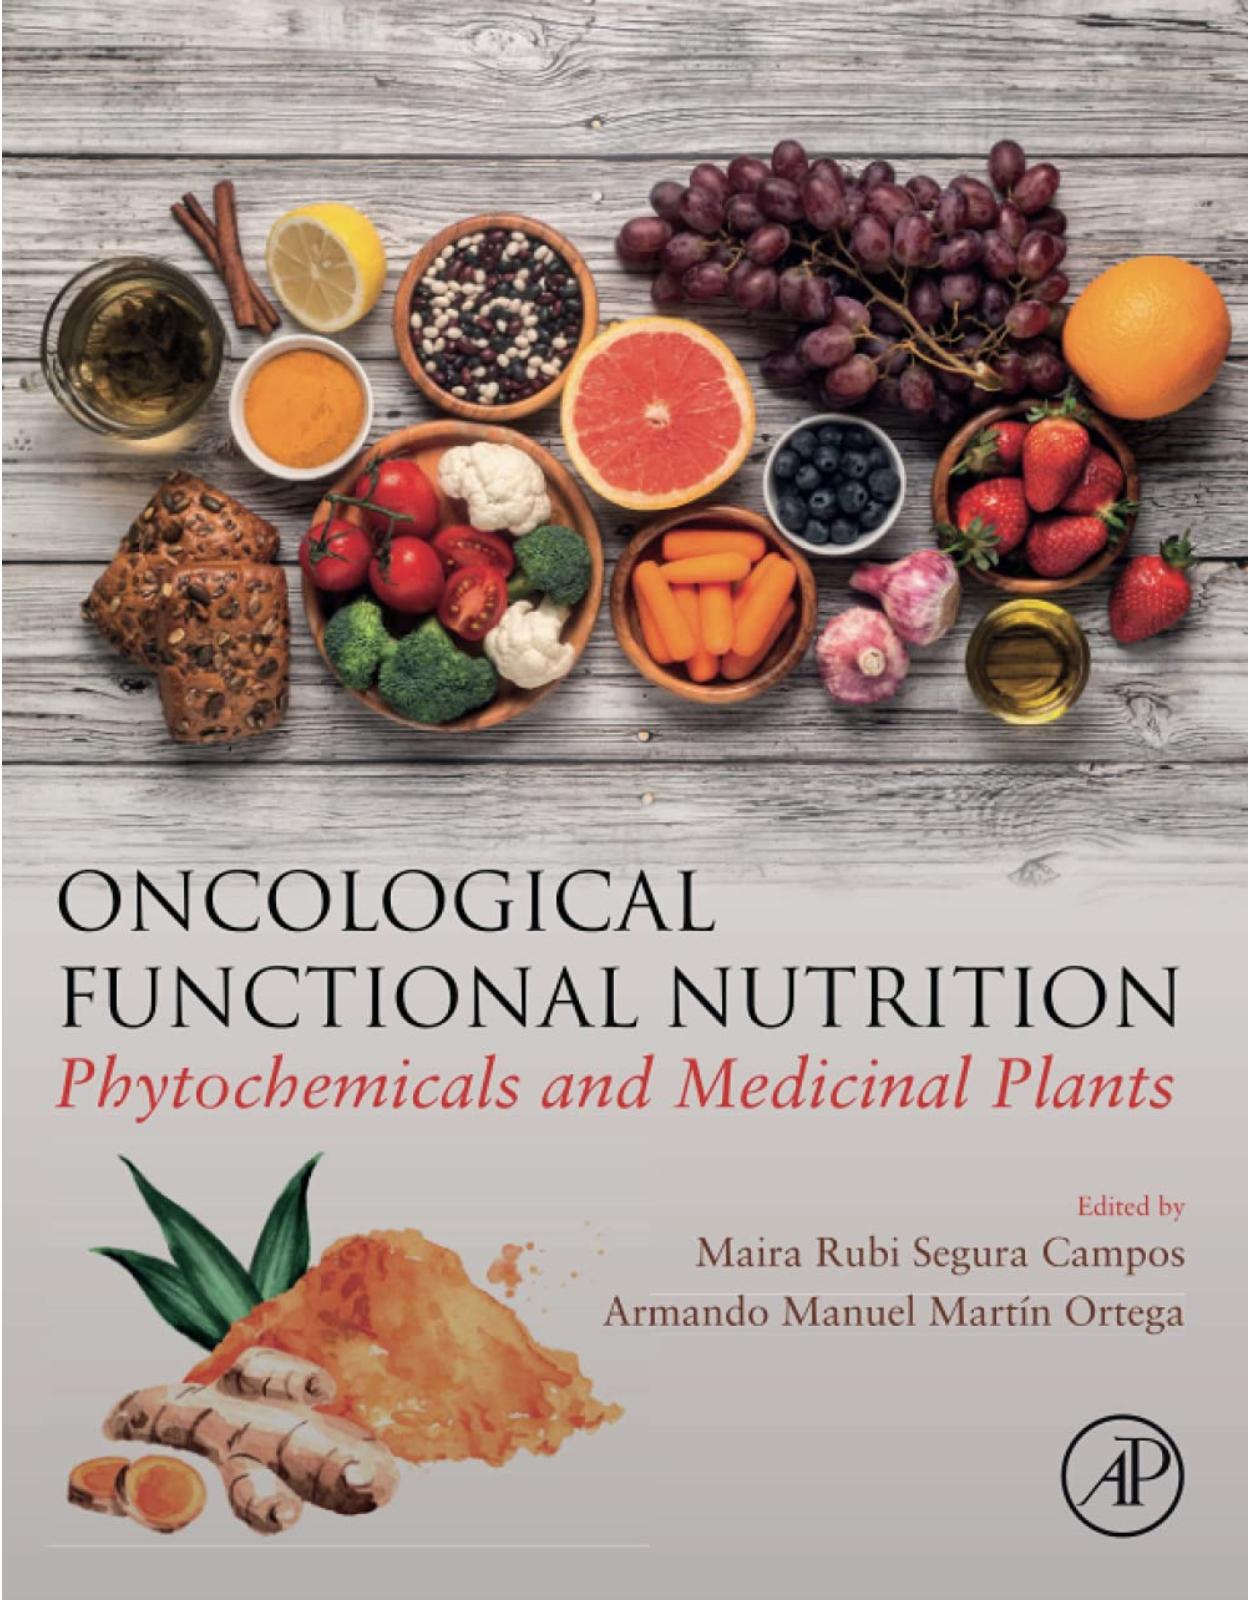 Oncological Functional Nutrition: Phytochemicals and Medicinal Plants 